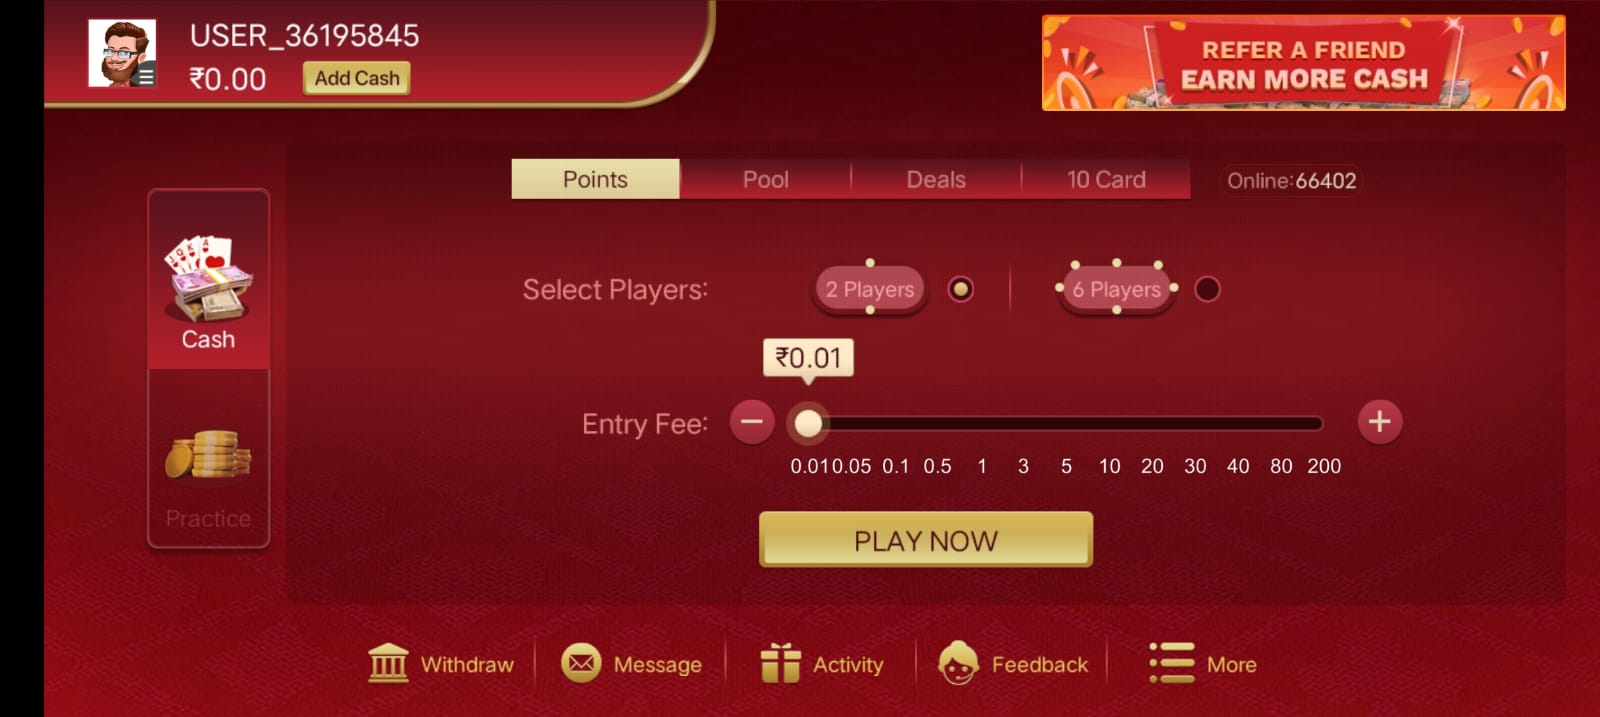 AVAILABLE GAME'S IN "Rummy Expert" APP